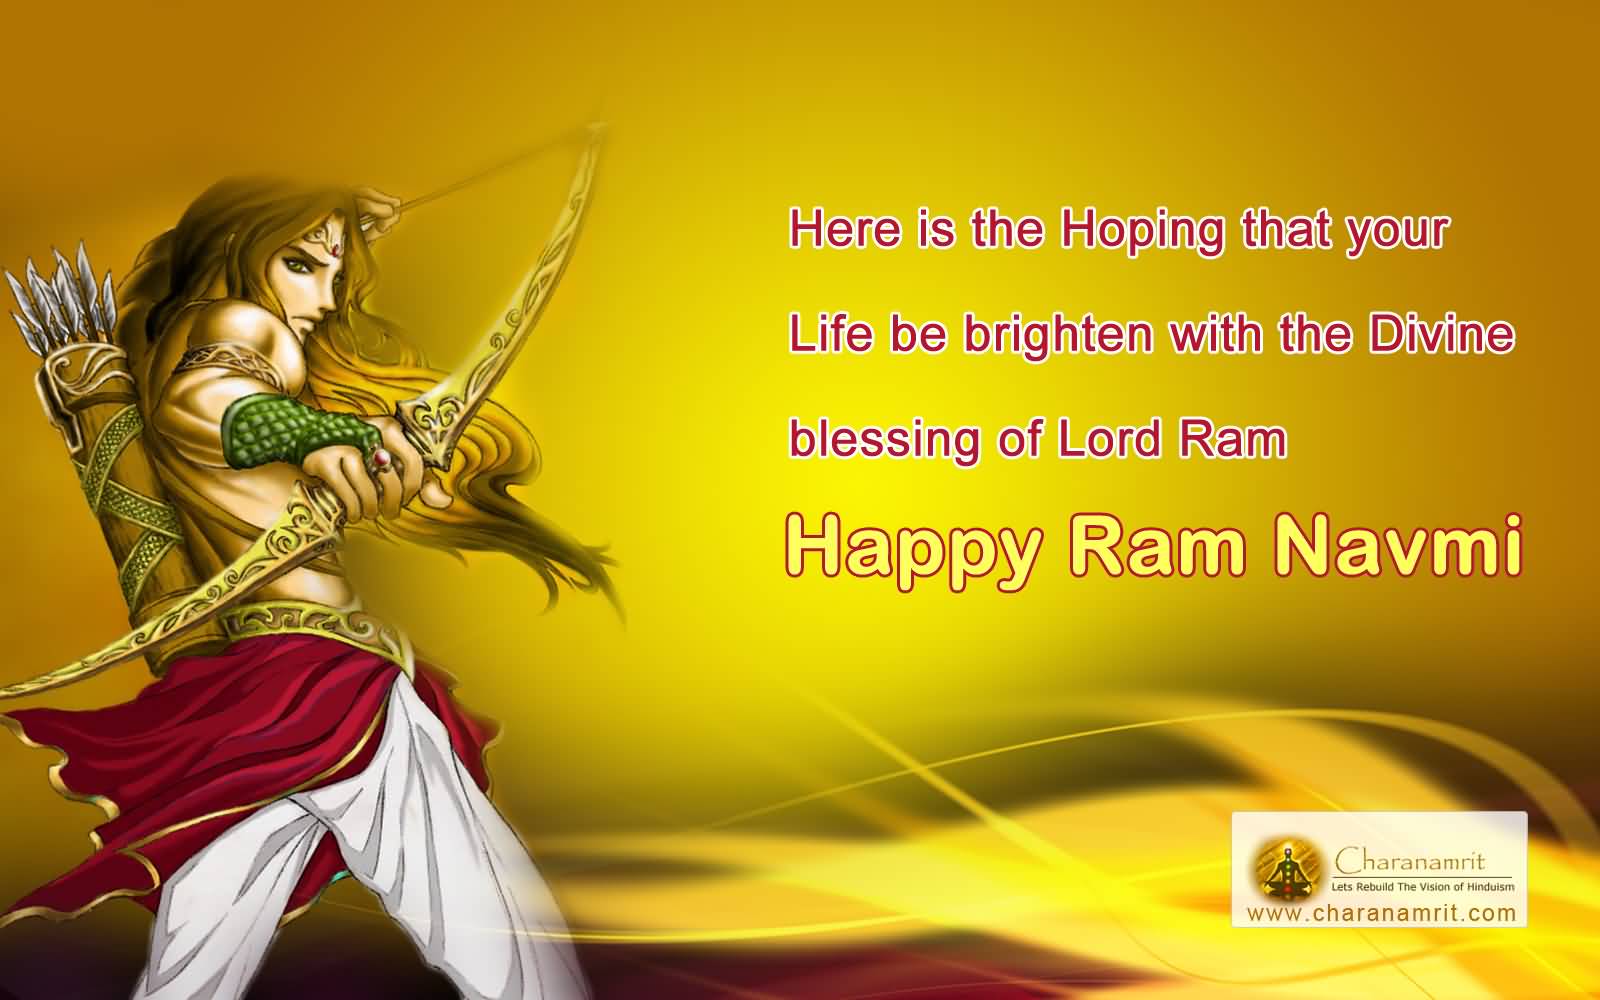 Here Is The Hoping That Your Life Be Brighten With The Divine Blessings Of Lord Ram Happy Ram Navami